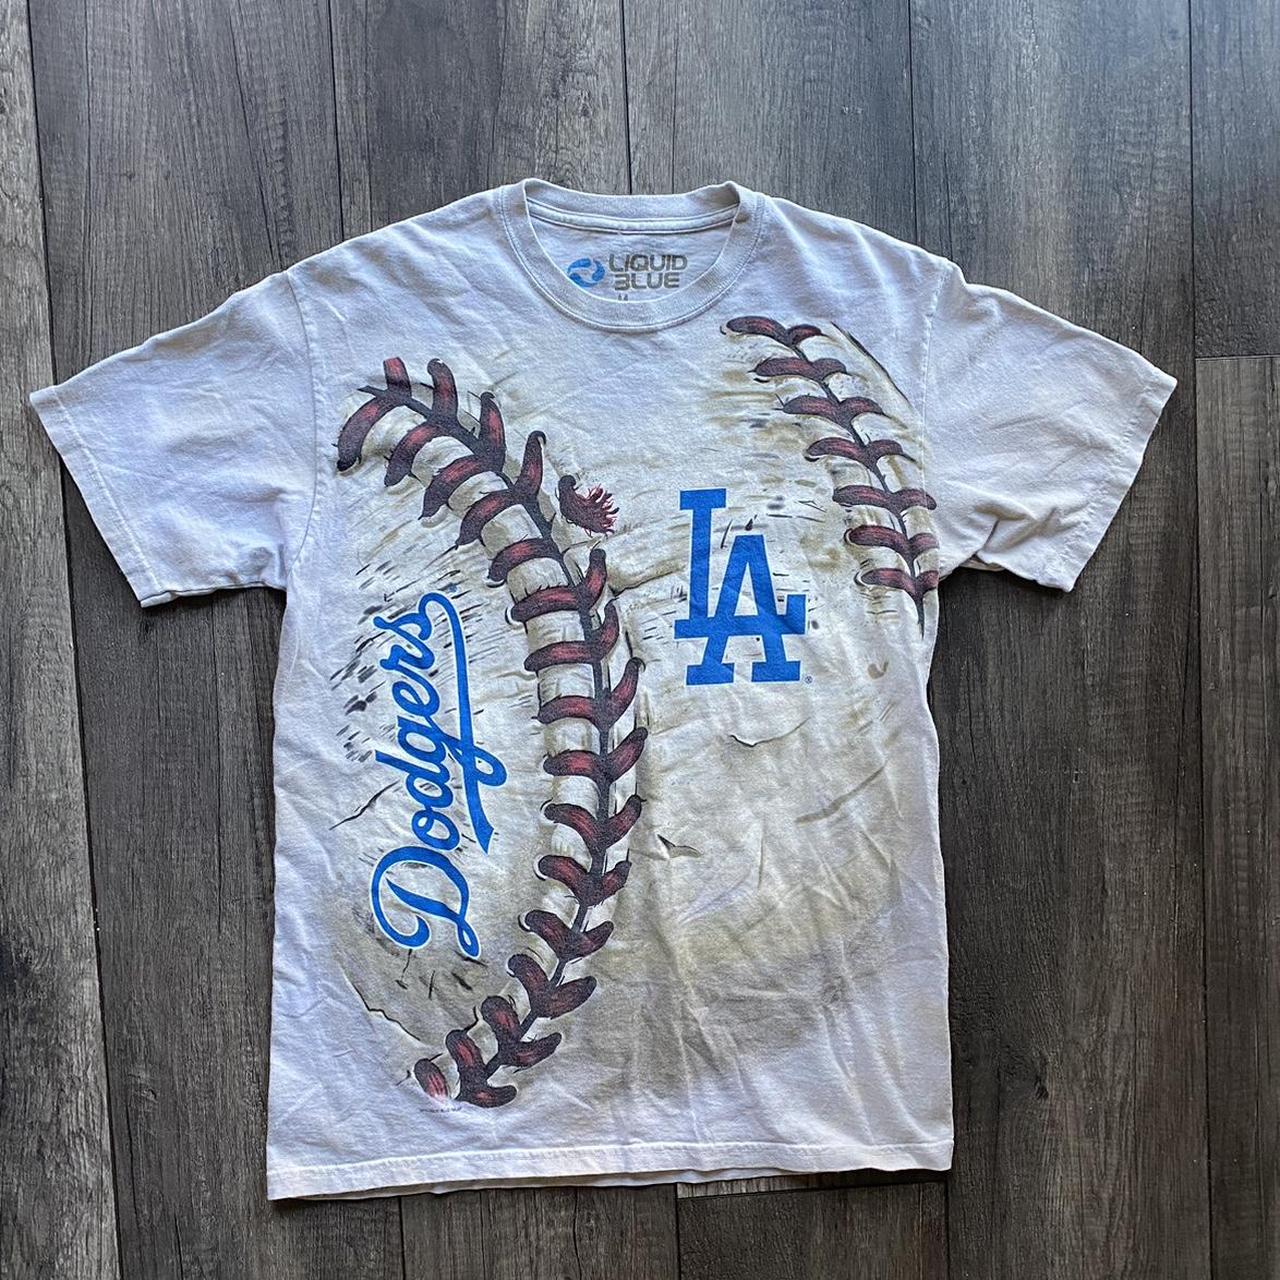 Dodgers Medium sized T-shirt for Ladies! New without - Depop